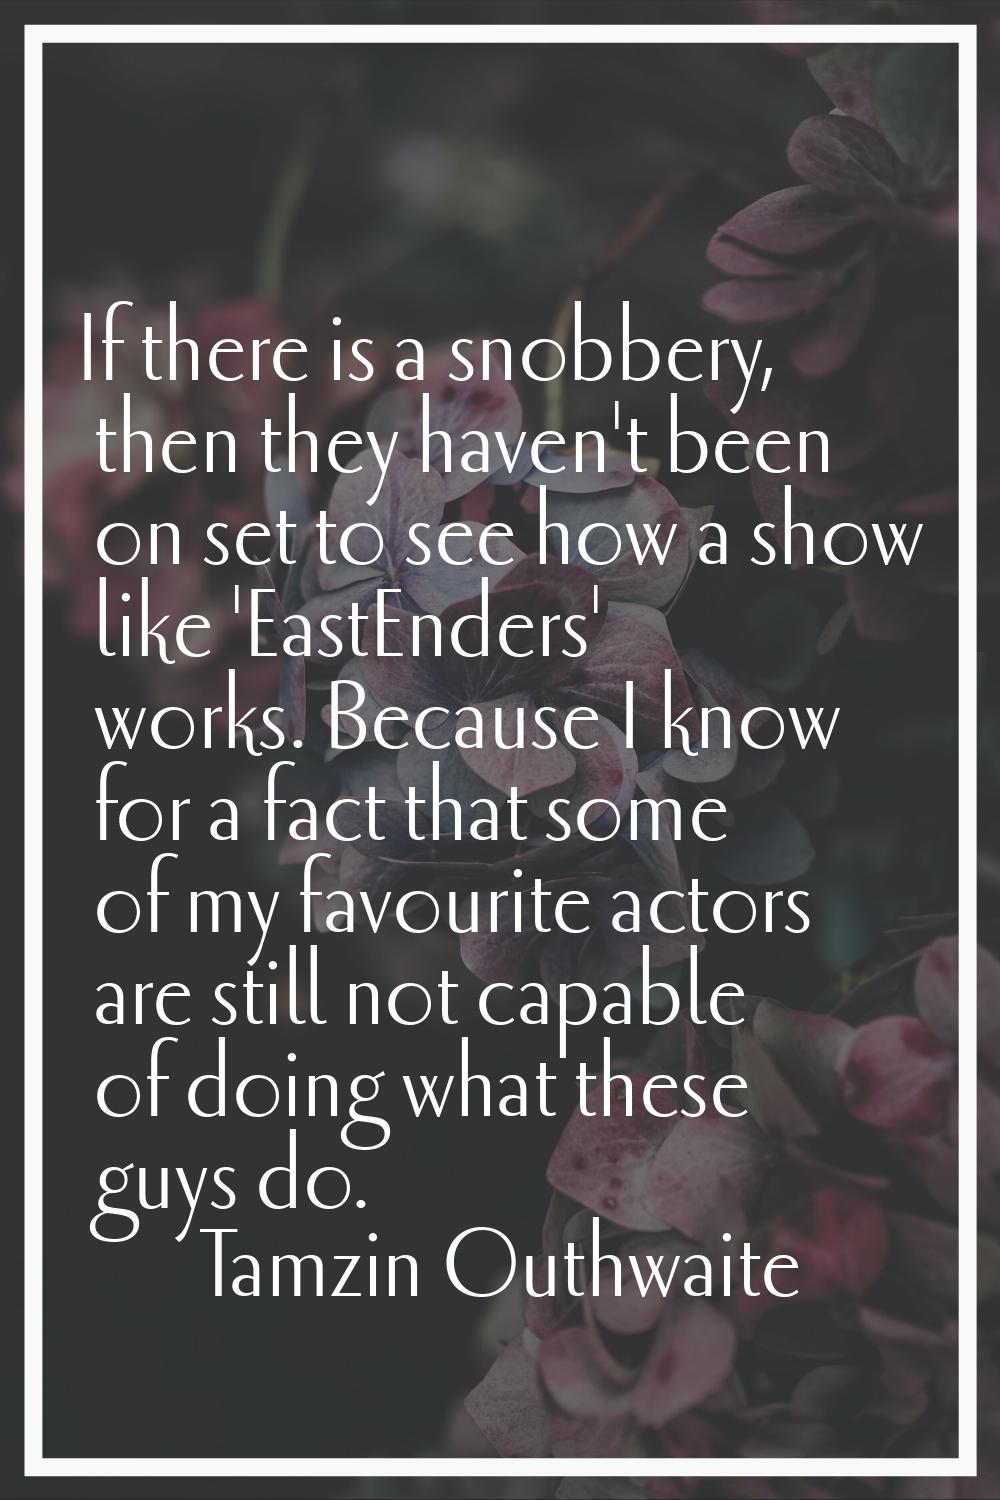 If there is a snobbery, then they haven't been on set to see how a show like 'EastEnders' works. Be